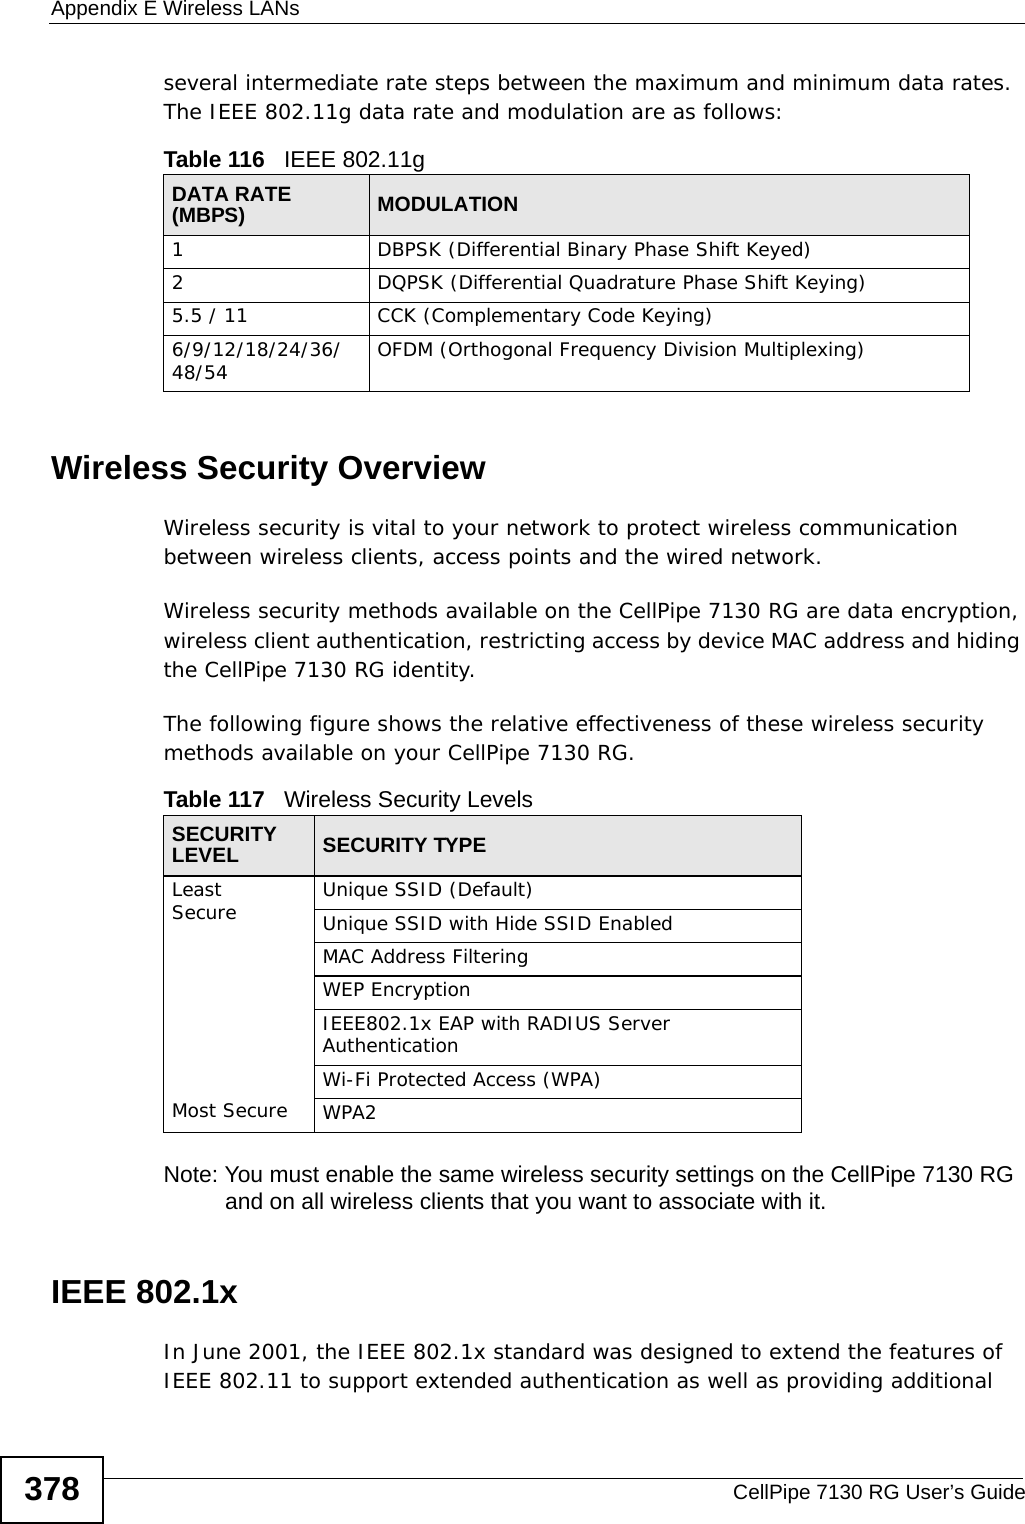 Appendix E Wireless LANsCellPipe 7130 RG User’s Guide378several intermediate rate steps between the maximum and minimum data rates. The IEEE 802.11g data rate and modulation are as follows:Wireless Security OverviewWireless security is vital to your network to protect wireless communication between wireless clients, access points and the wired network.Wireless security methods available on the CellPipe 7130 RG are data encryption, wireless client authentication, restricting access by device MAC address and hiding the CellPipe 7130 RG identity.The following figure shows the relative effectiveness of these wireless security methods available on your CellPipe 7130 RG.Note: You must enable the same wireless security settings on the CellPipe 7130 RG and on all wireless clients that you want to associate with it. IEEE 802.1xIn June 2001, the IEEE 802.1x standard was designed to extend the features of IEEE 802.11 to support extended authentication as well as providing additional Table 116   IEEE 802.11gDATA RATE (MBPS) MODULATION1 DBPSK (Differential Binary Phase Shift Keyed)2 DQPSK (Differential Quadrature Phase Shift Keying)5.5 / 11 CCK (Complementary Code Keying) 6/9/12/18/24/36/48/54 OFDM (Orthogonal Frequency Division Multiplexing) Table 117   Wireless Security LevelsSECURITY LEVEL SECURITY TYPELeast       Secure                                                                                Most SecureUnique SSID (Default)Unique SSID with Hide SSID EnabledMAC Address FilteringWEP EncryptionIEEE802.1x EAP with RADIUS Server AuthenticationWi-Fi Protected Access (WPA)WPA2